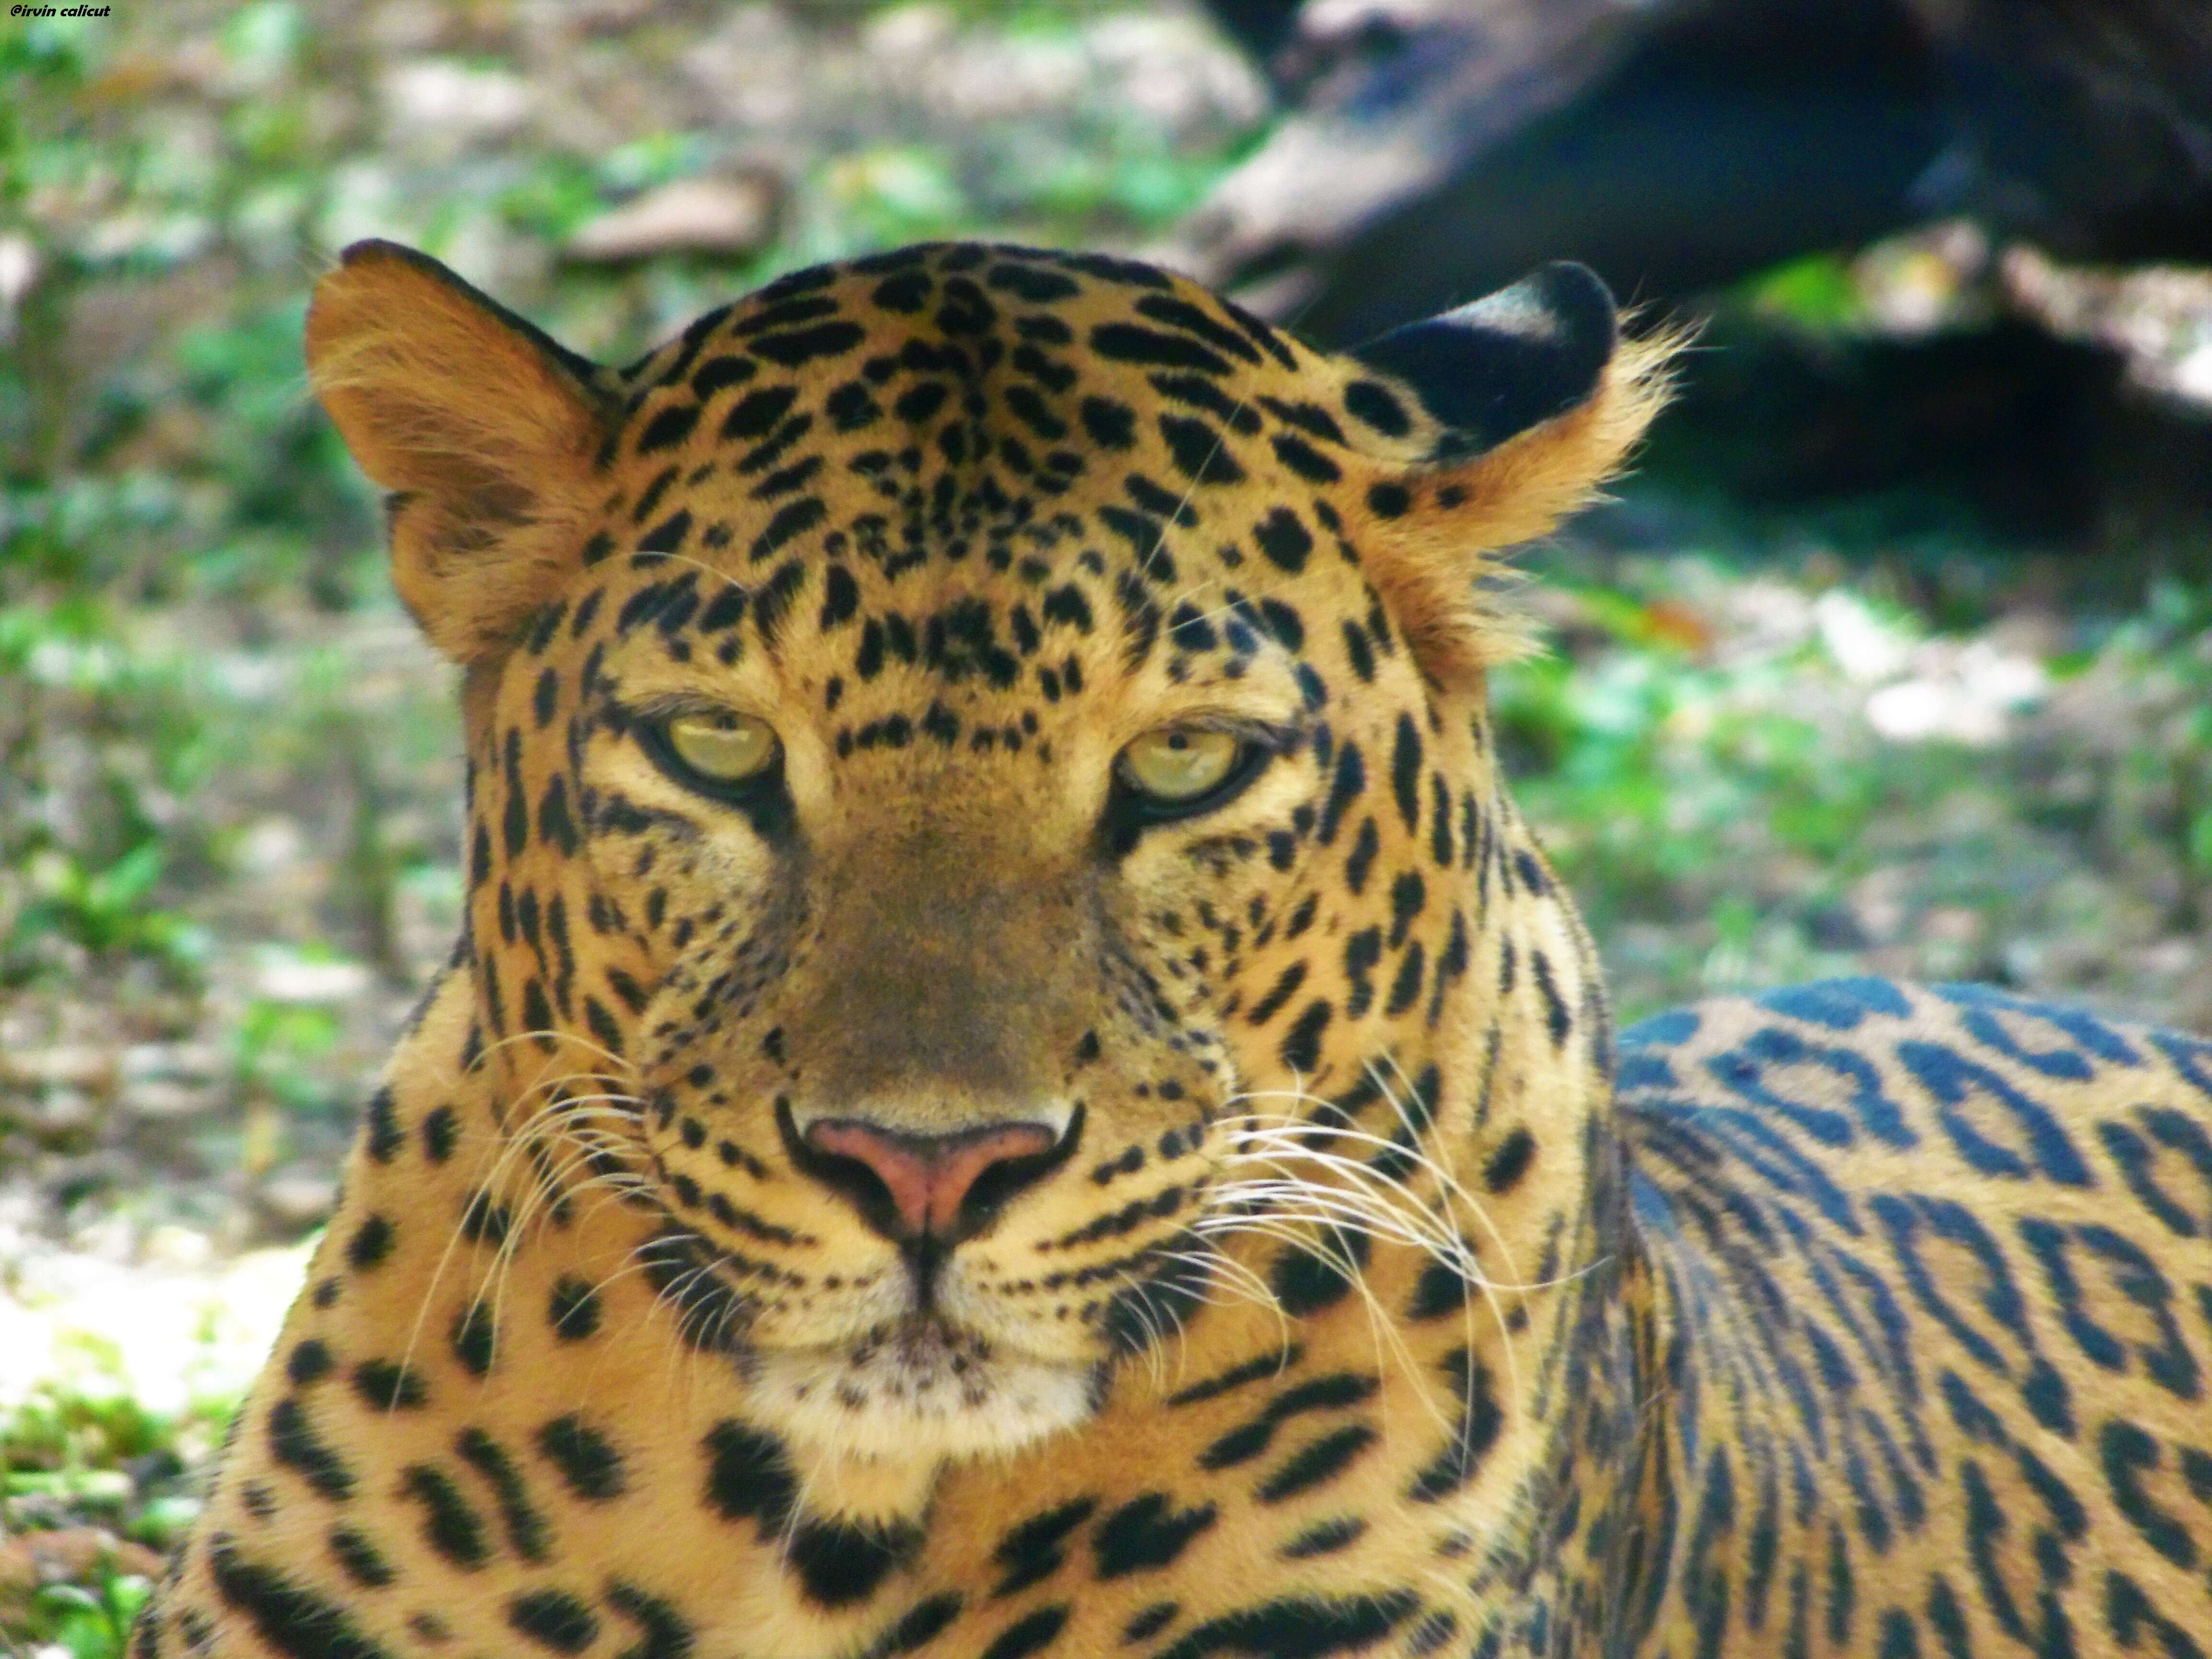 Image of Indian leopard